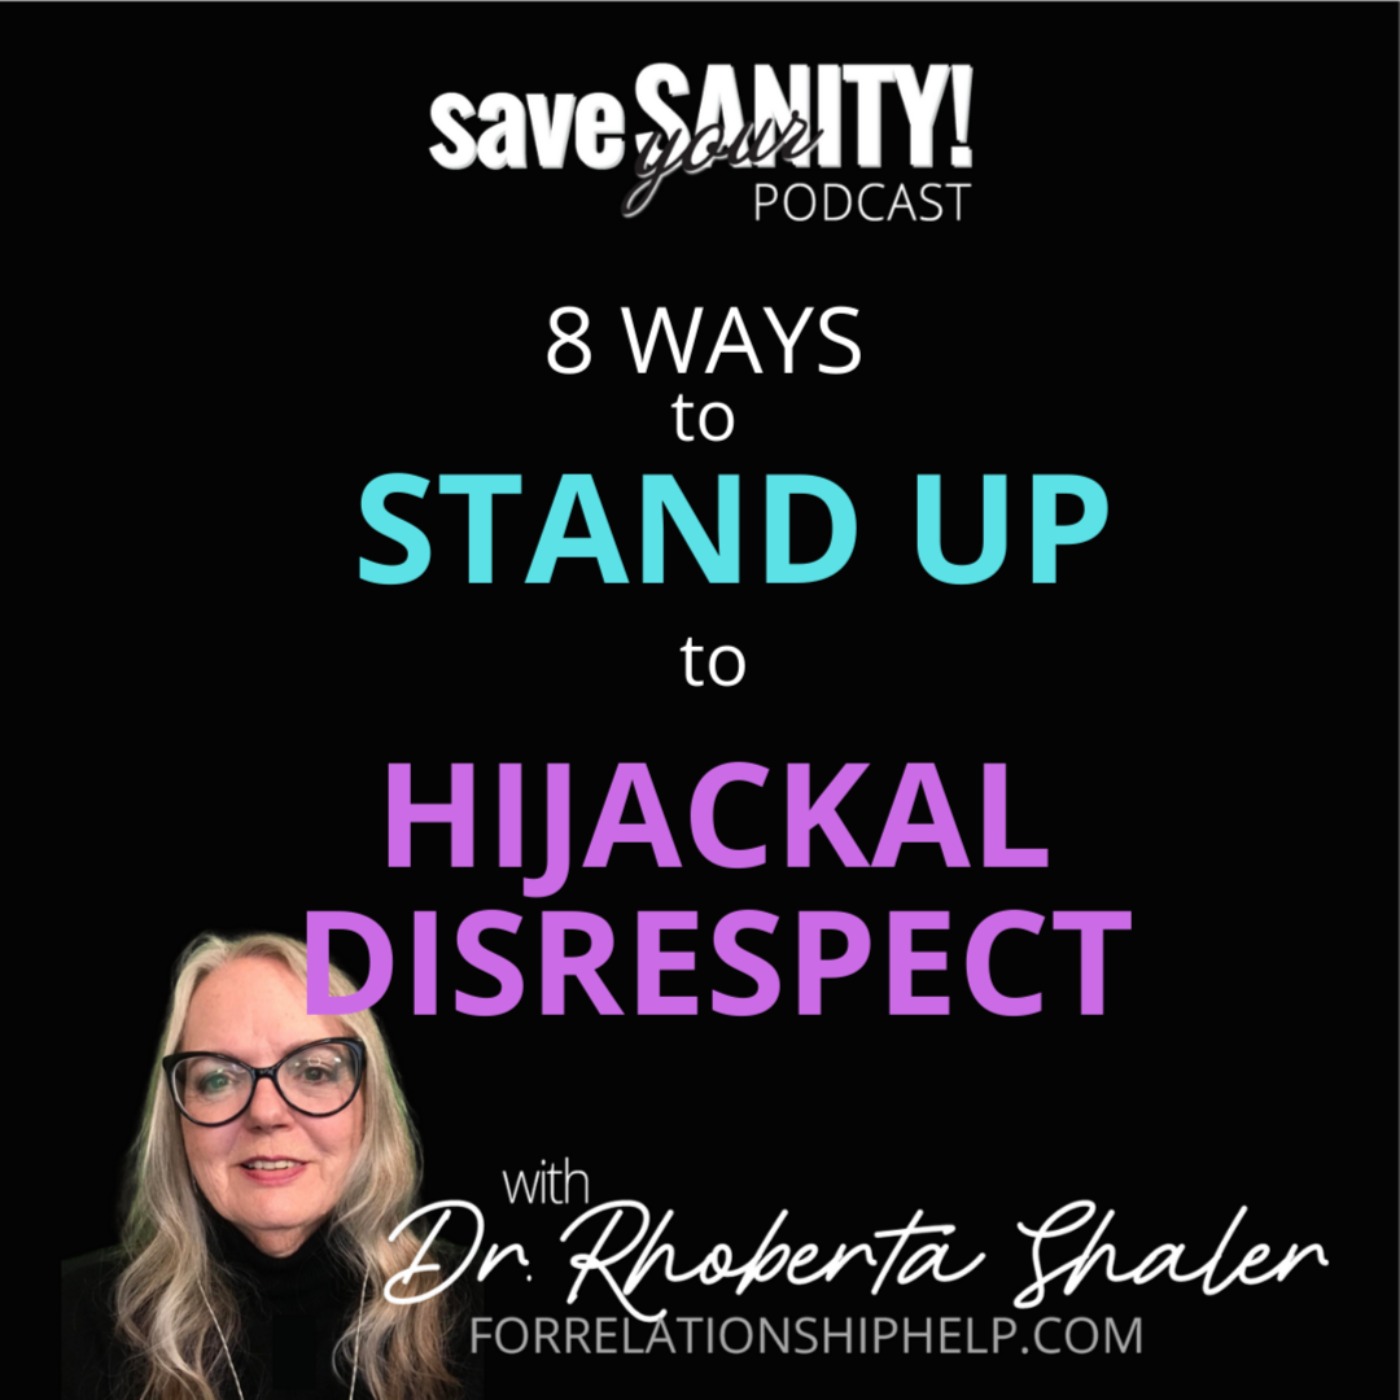 8 Ways to Stand Up to Hijackal Disrespect